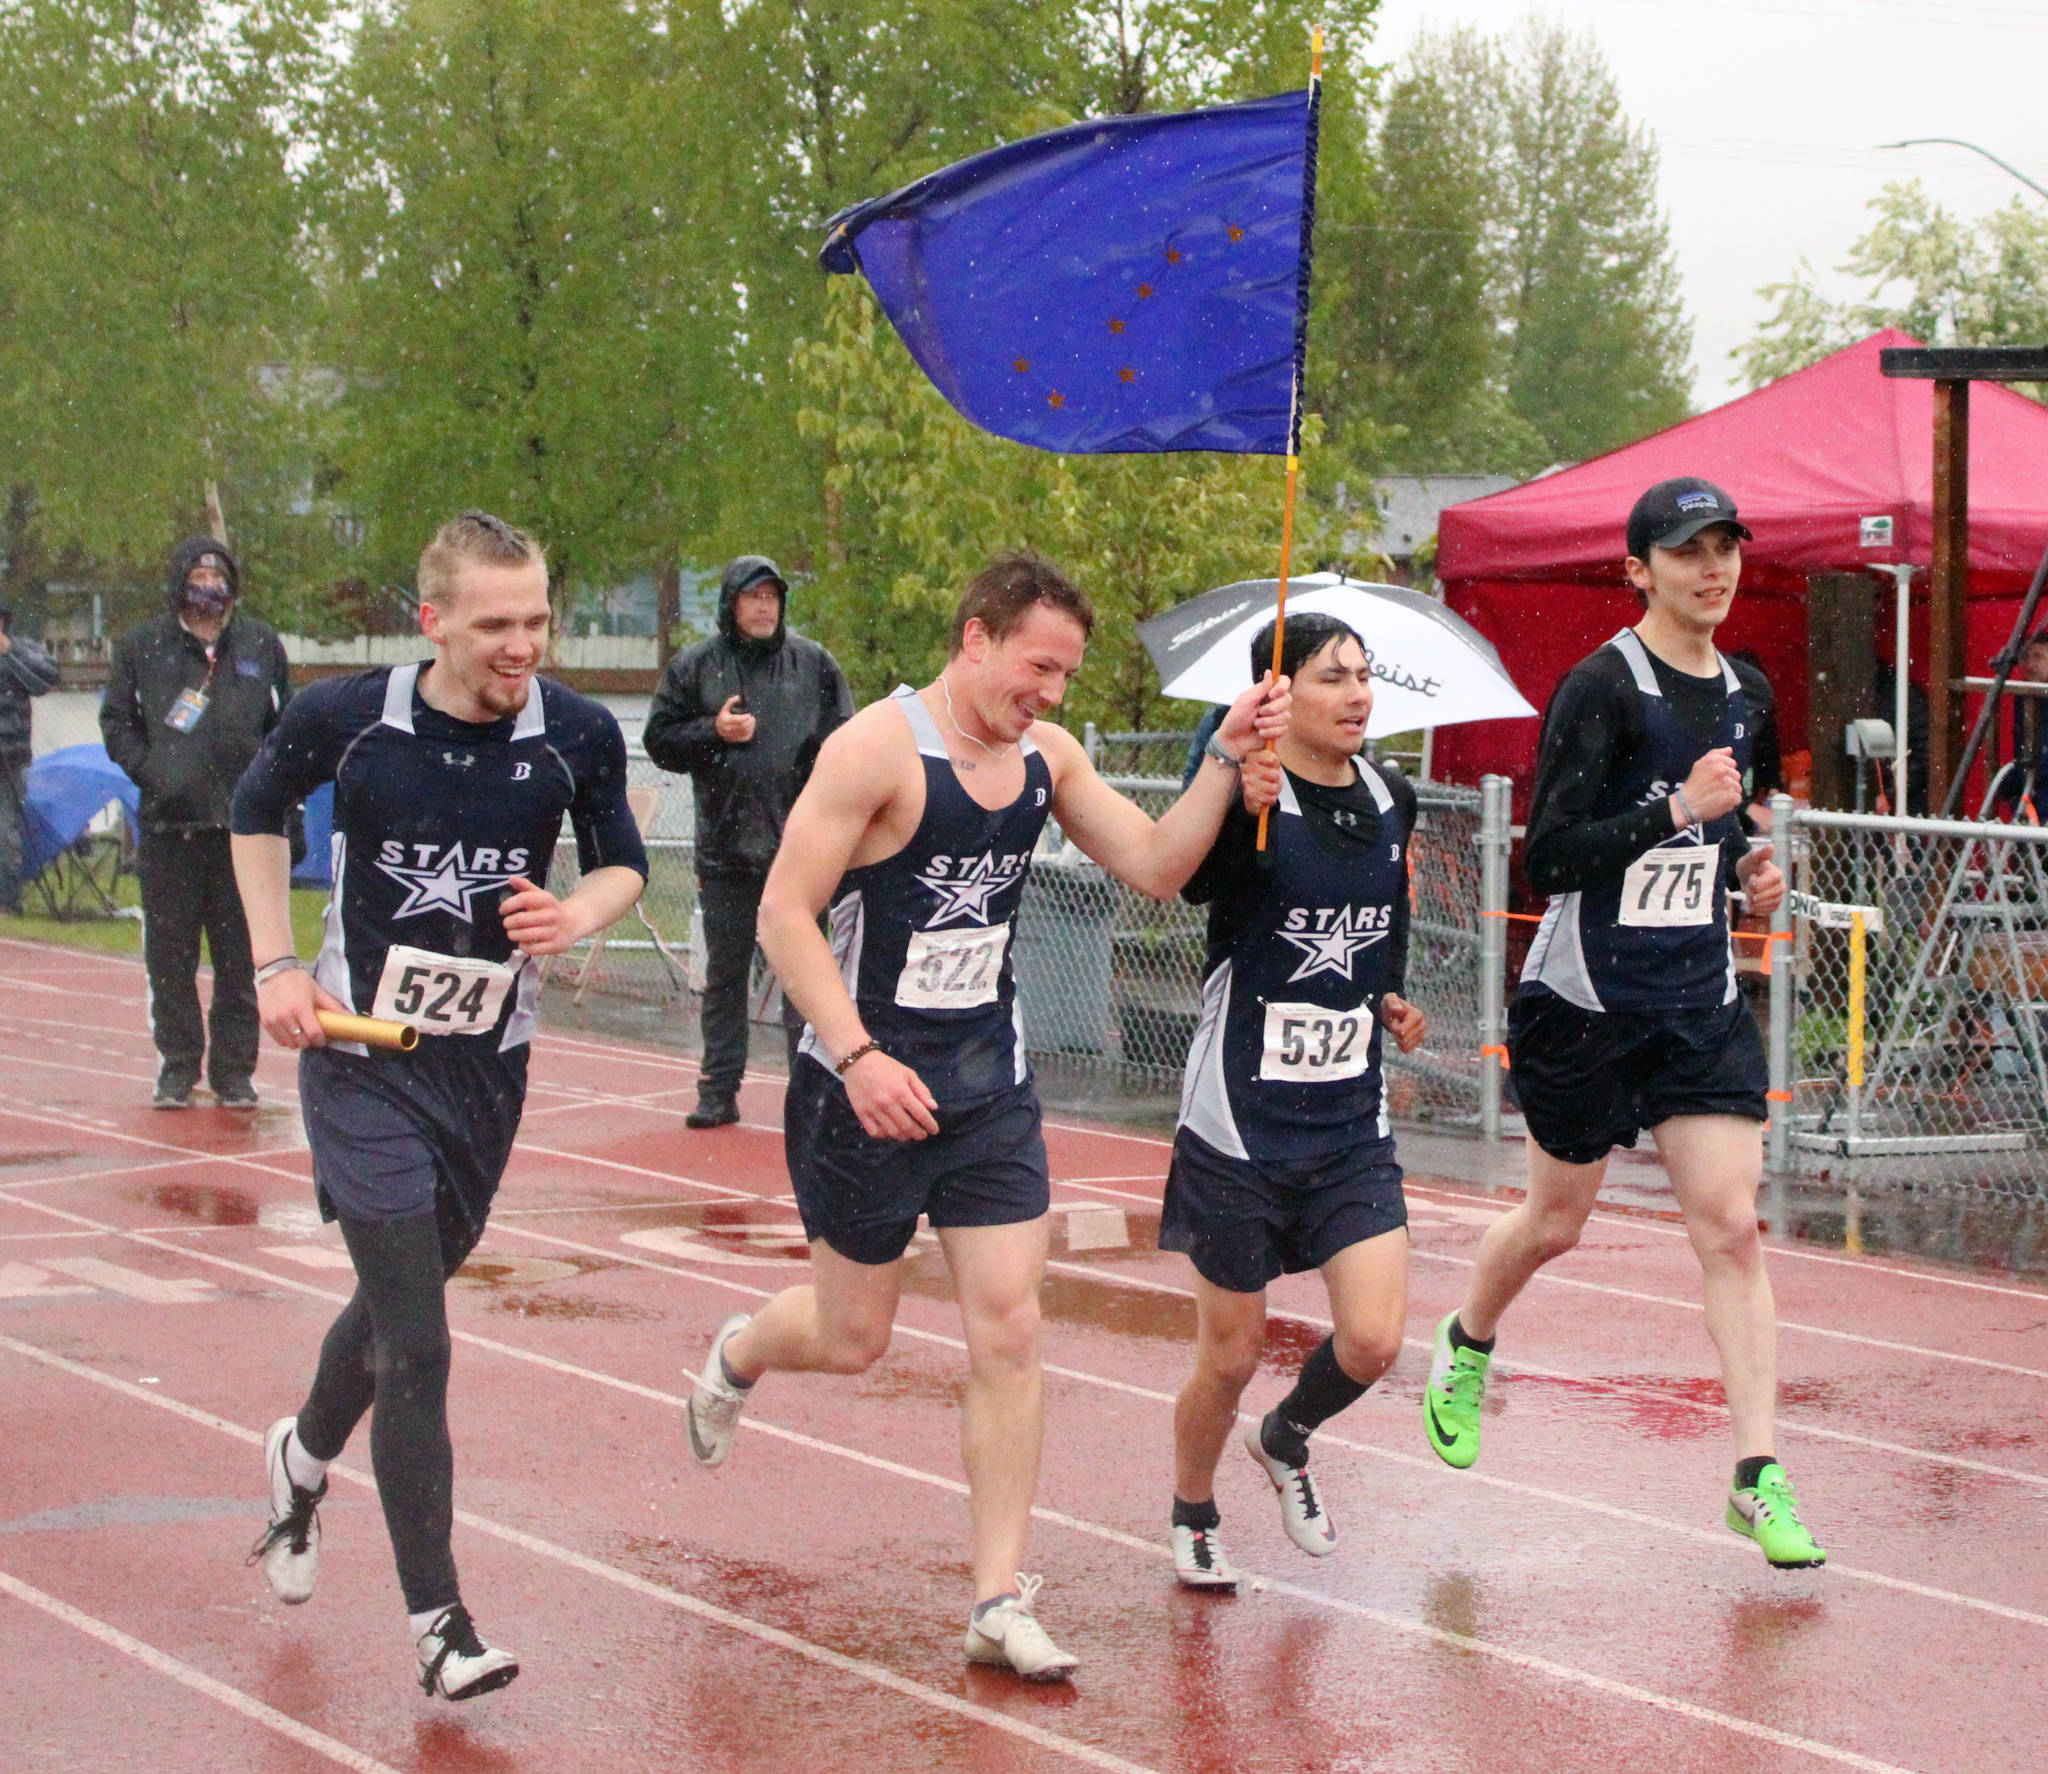 Soldotna’s Eli Cravens, Zach Burns, Trenton O’Reagan and Avery Reid celebrate winning the 400-meter relay at the Division I state track and field meet at Dimond High School in Anchorage, Alaska, on Saturday, May 29, 2021. (Photo by Tim Rockey/Frontiersman)